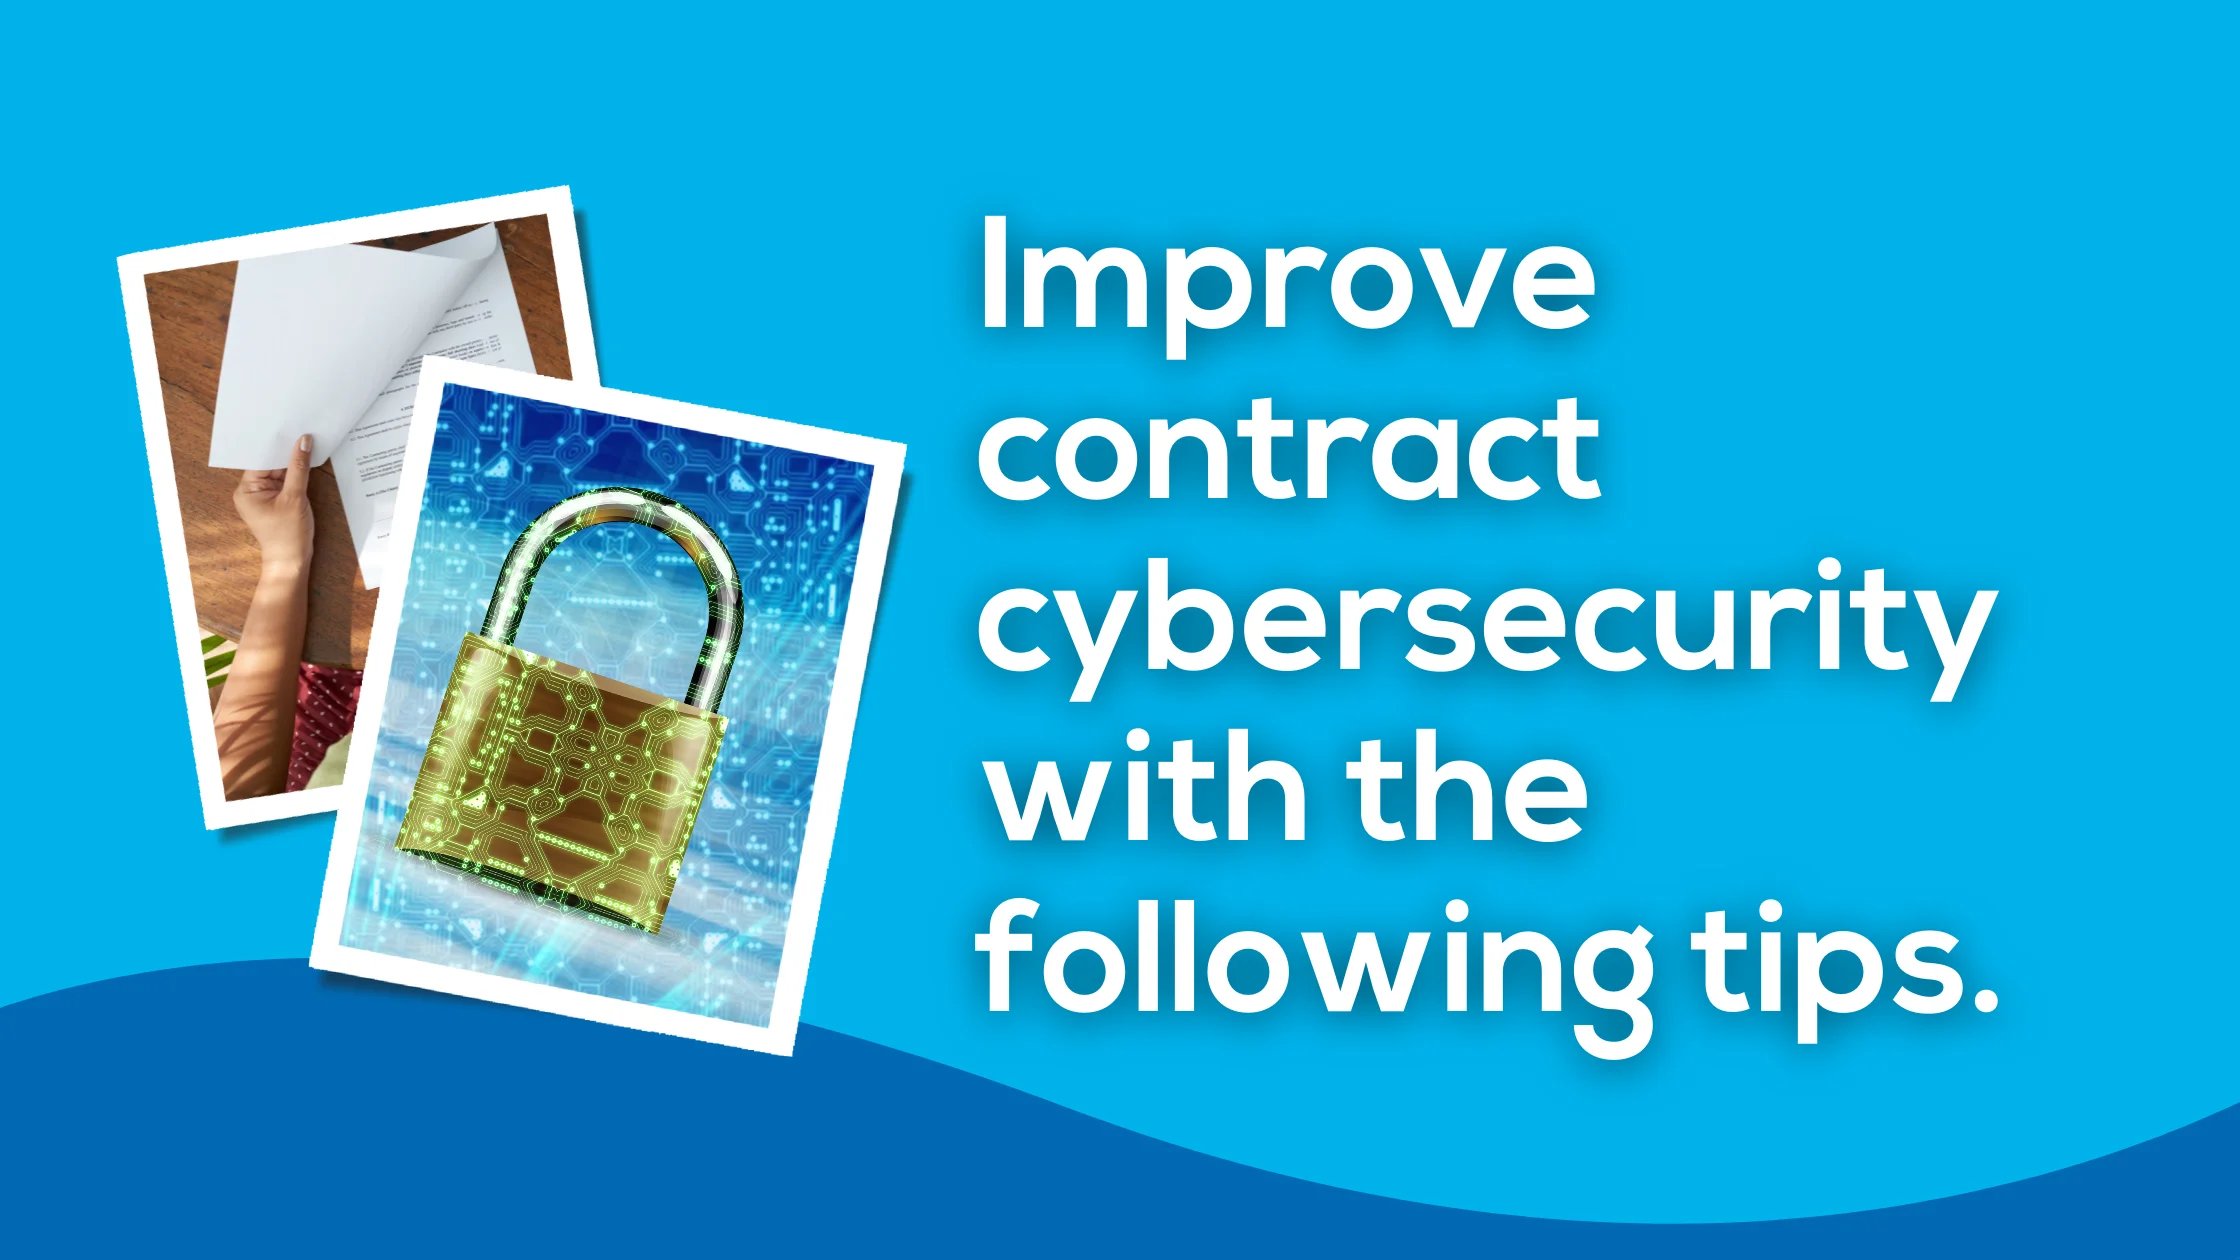 Improve contract cybersecurity with the following tips.